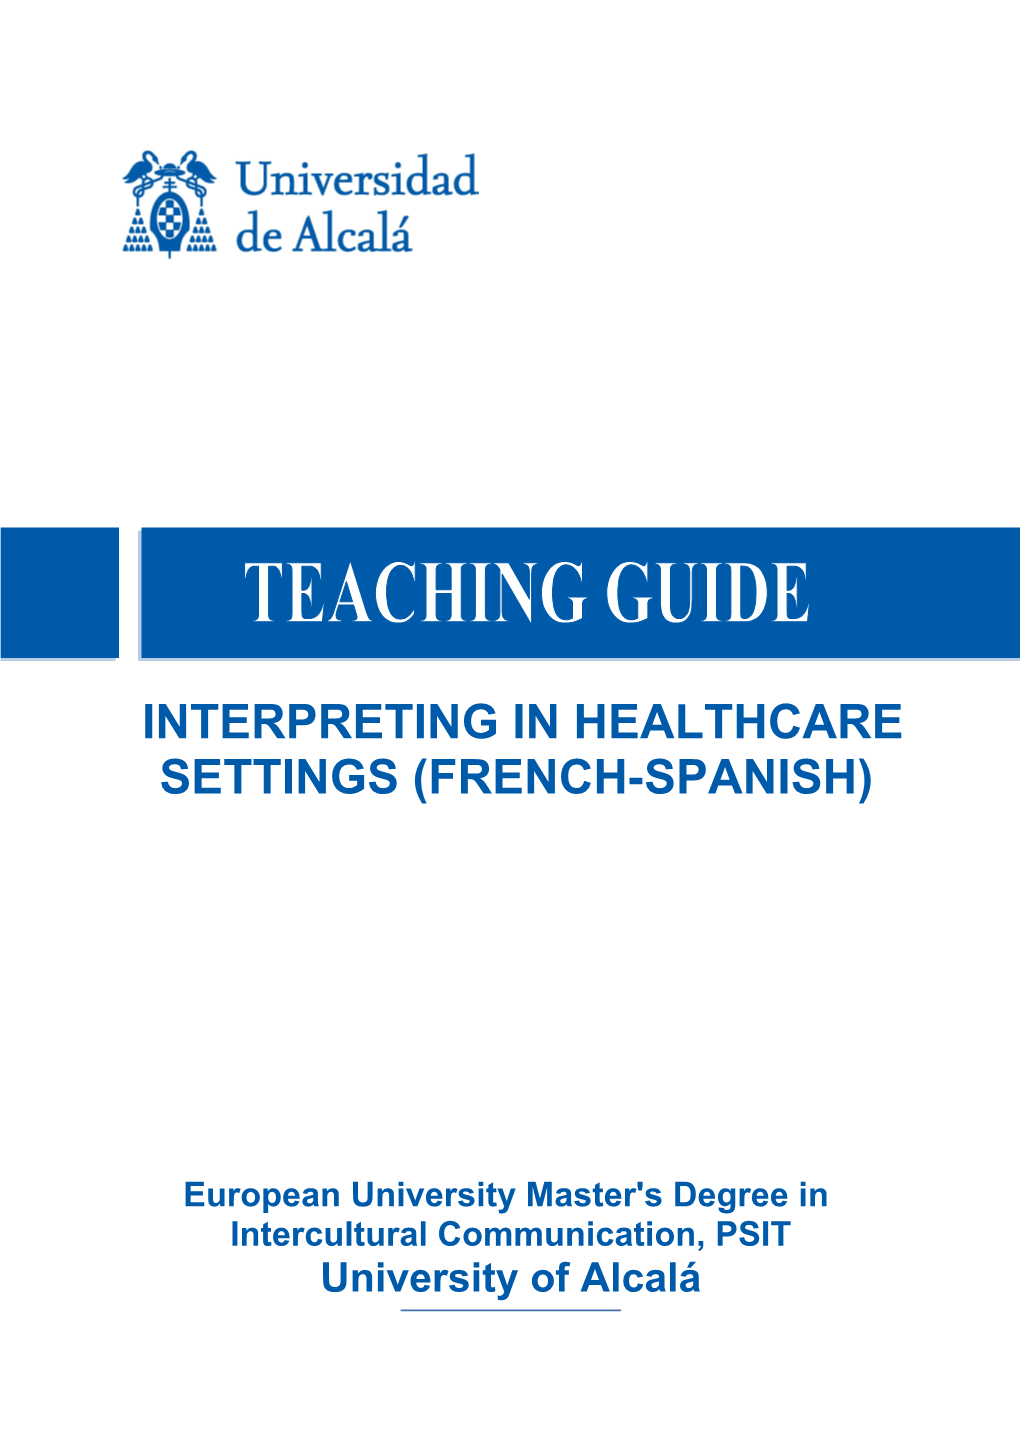 Interpreting in Healthcare Settings (French-Spanish)